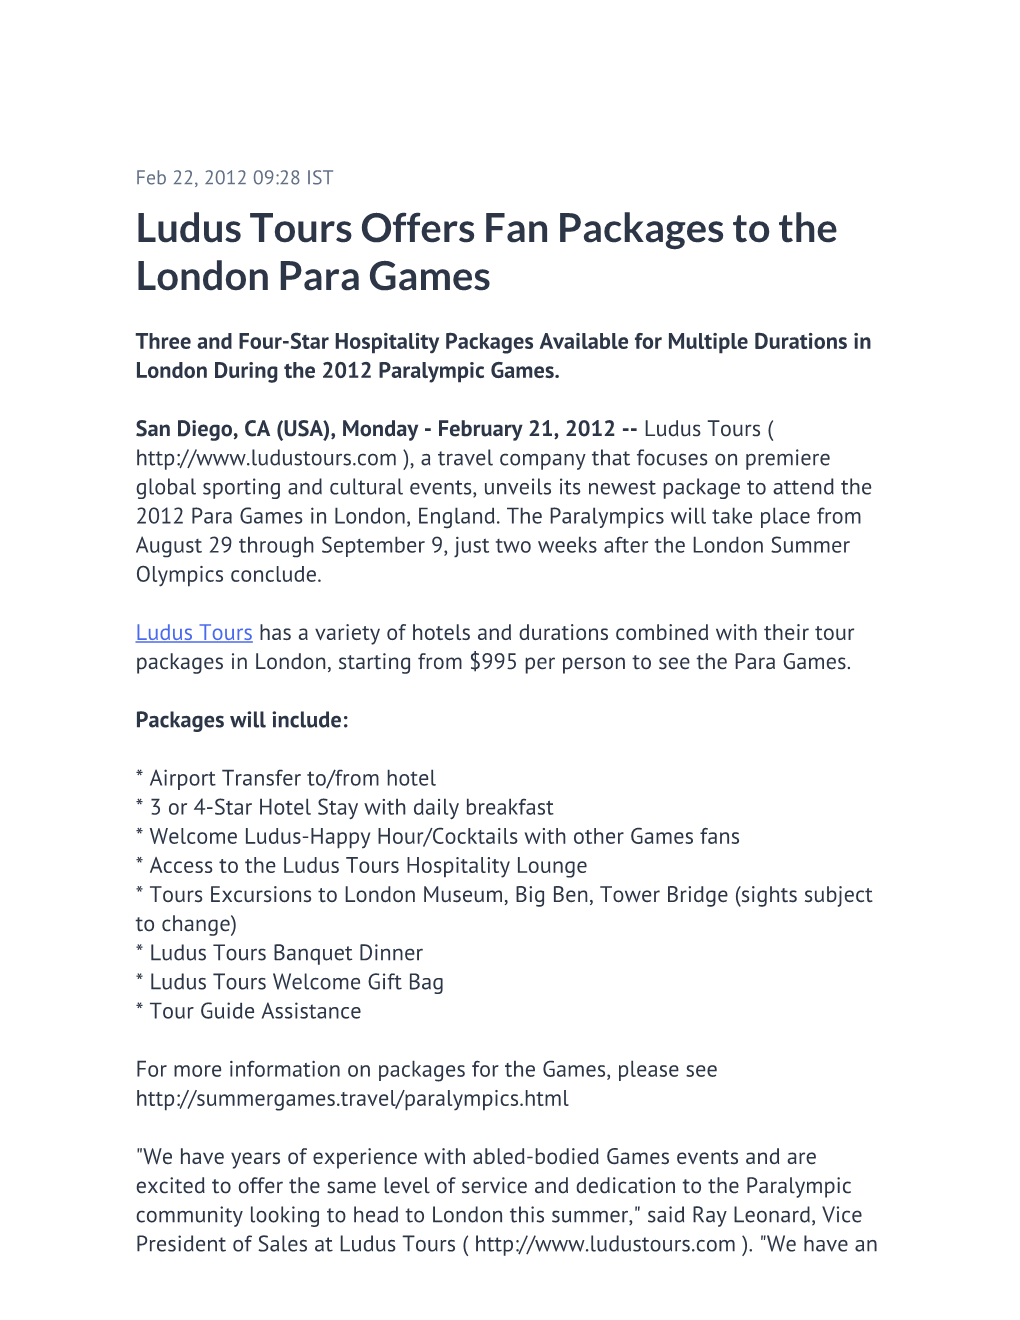 Ludus Tours Offers Fan Packages to the London Para Games